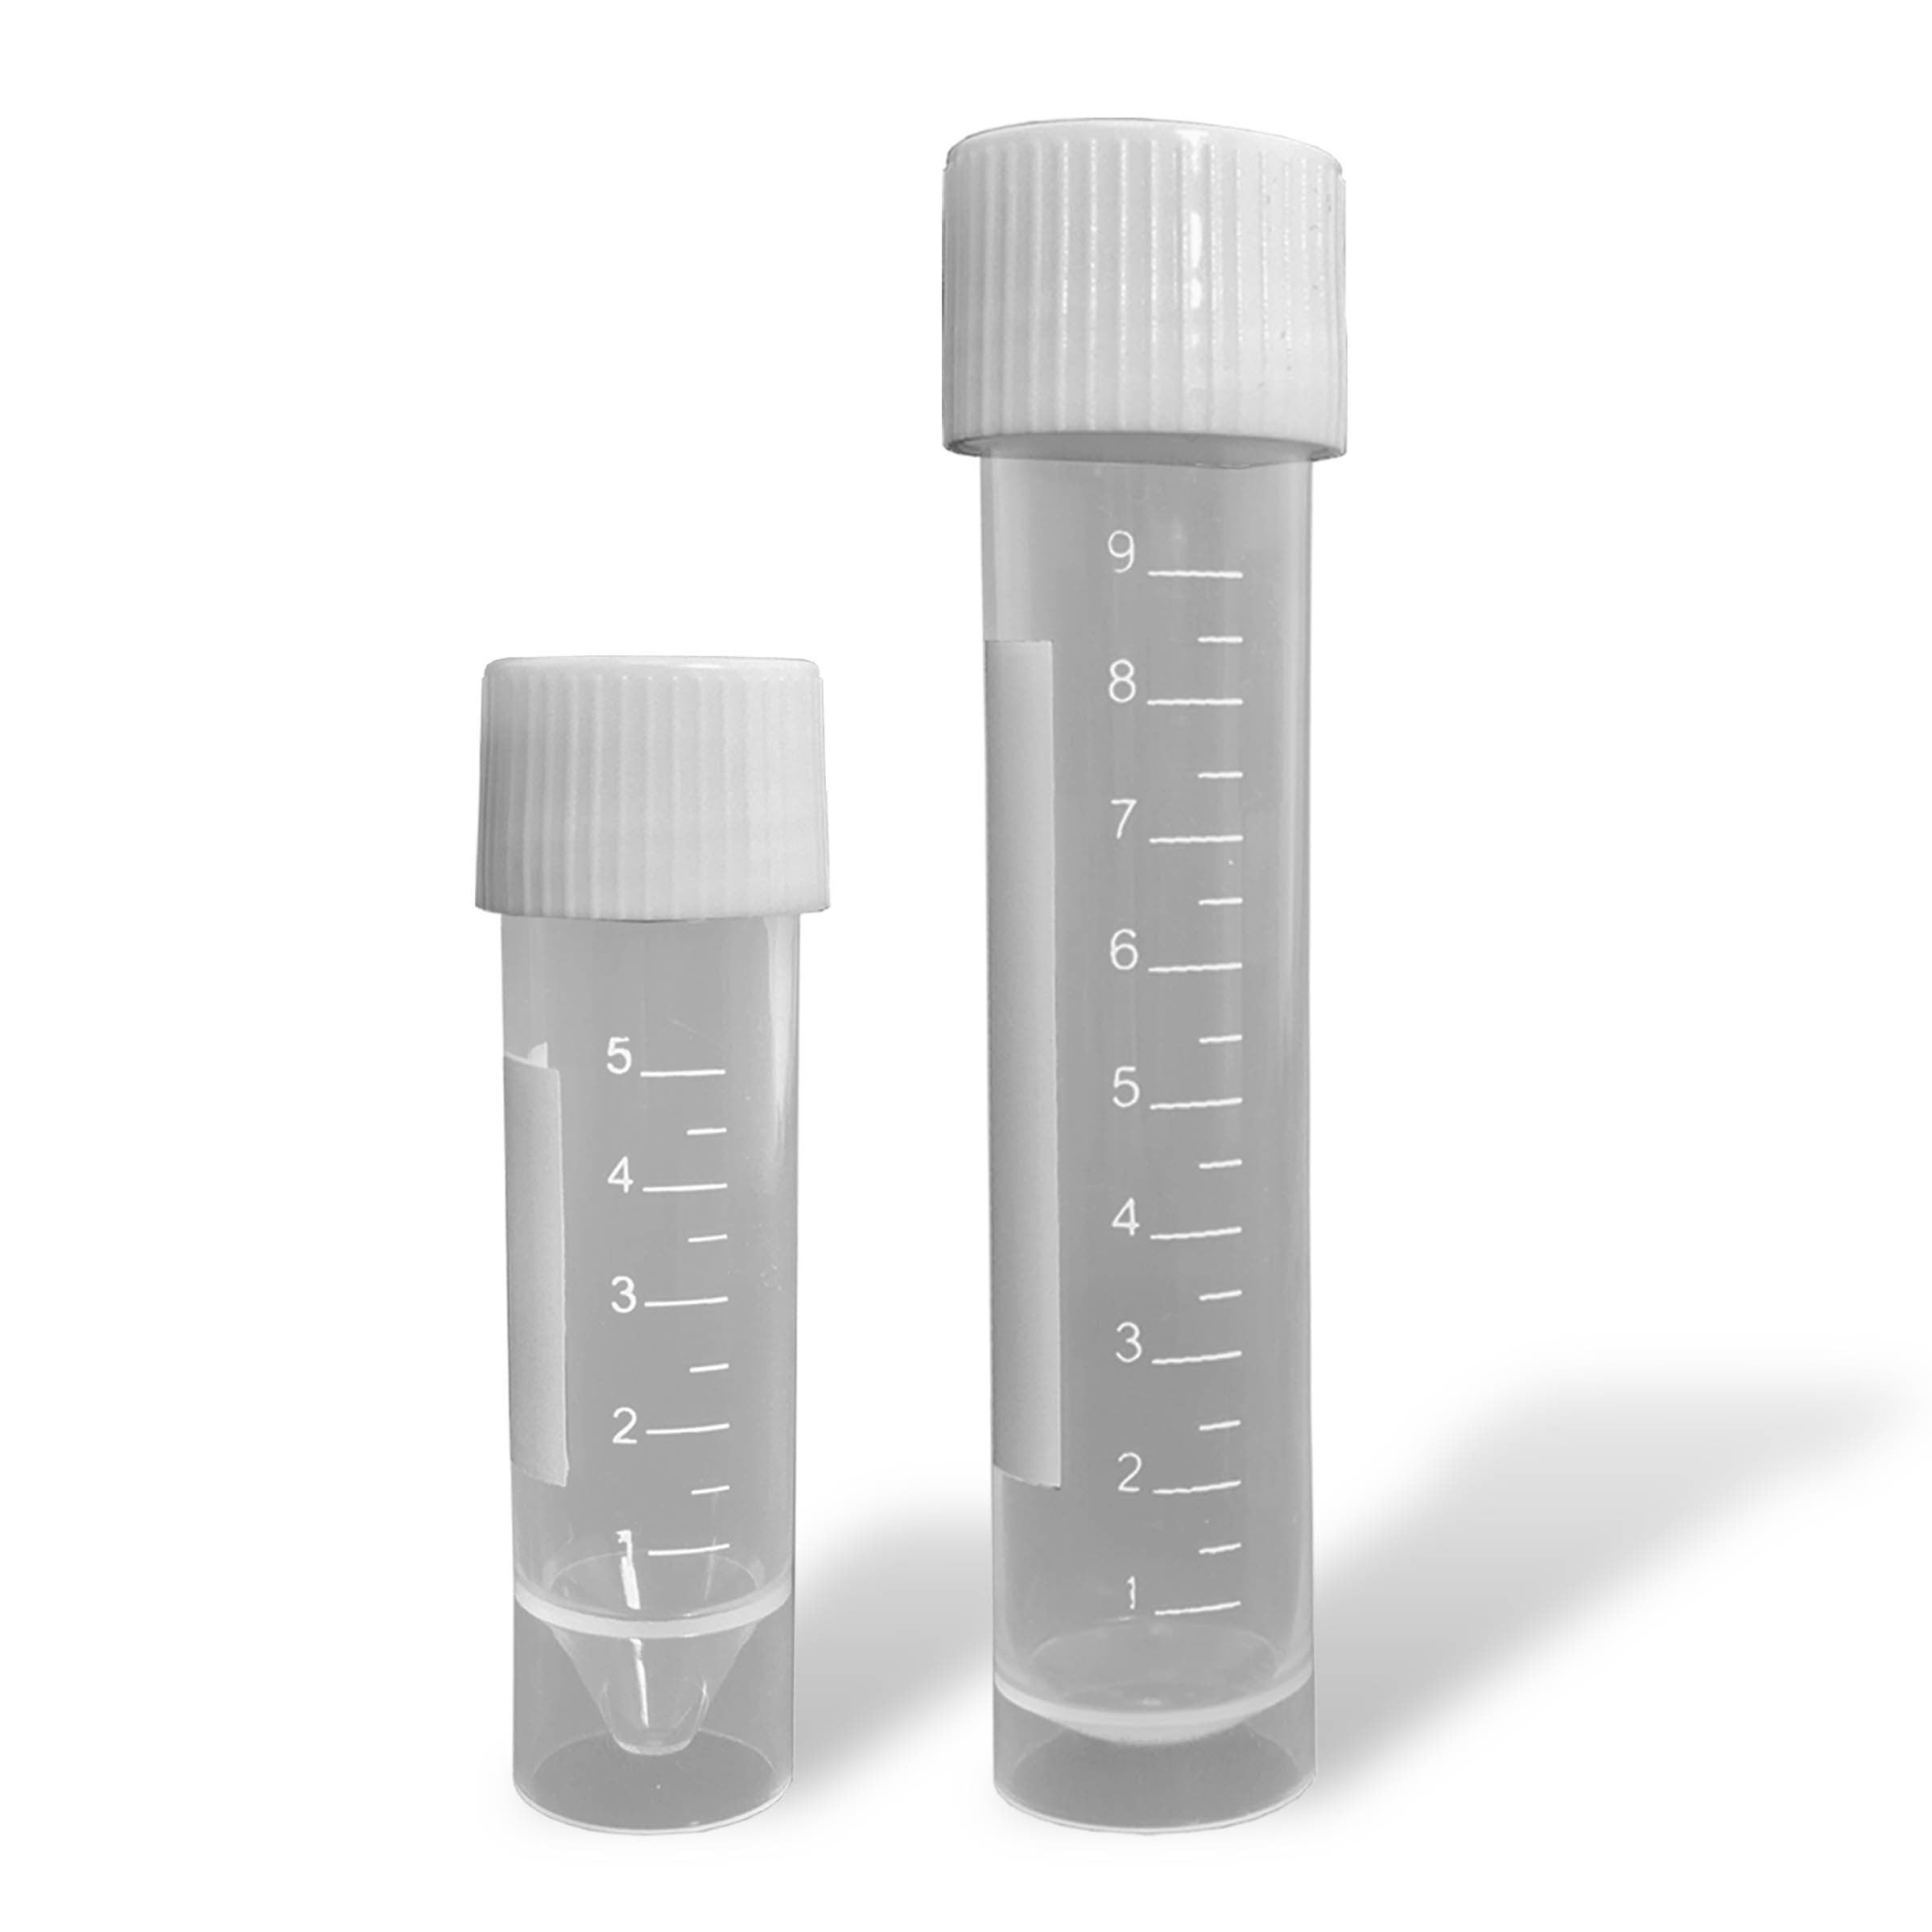 MTC Bio C1811, Transport Tube, Sterile, 16 x 60mm, 5ml, with Screw-Cap, Printed Graduations, Self-Standing, 100 Tubes Per Bag, with Caps Attached, 1000/cs